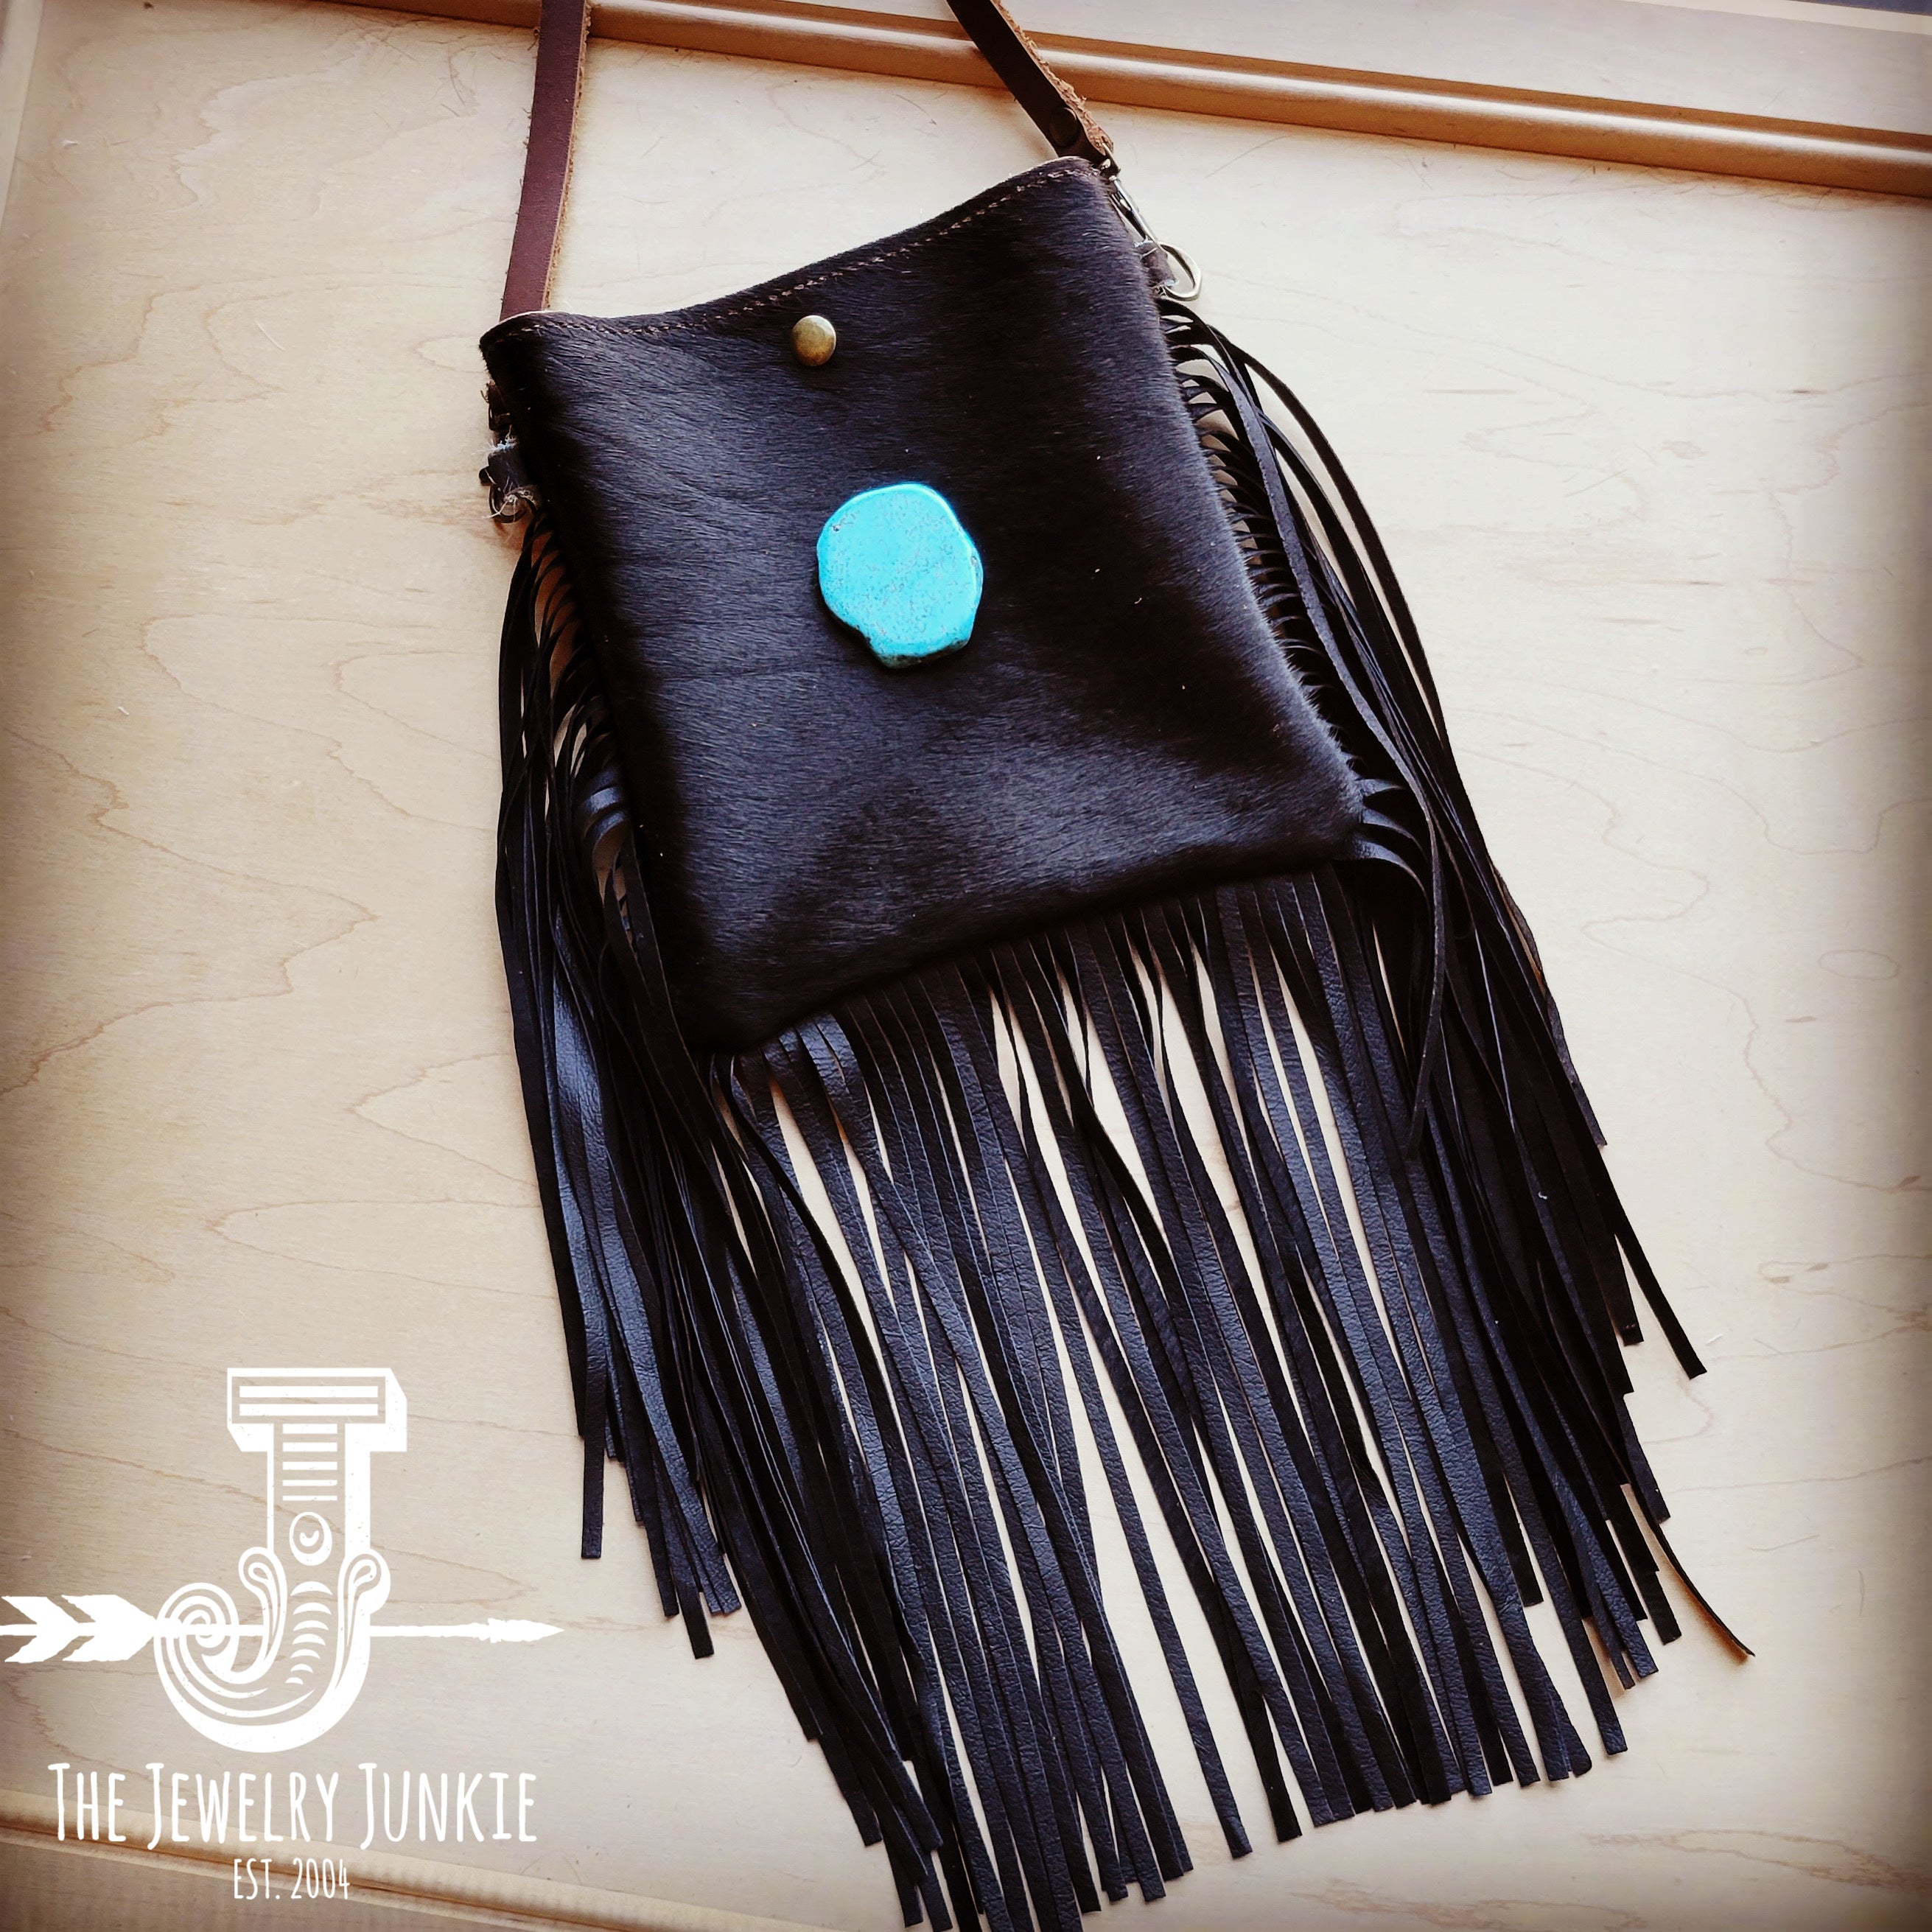 CROSSBODY BAG WITH BEADS AND FRINGING - Black